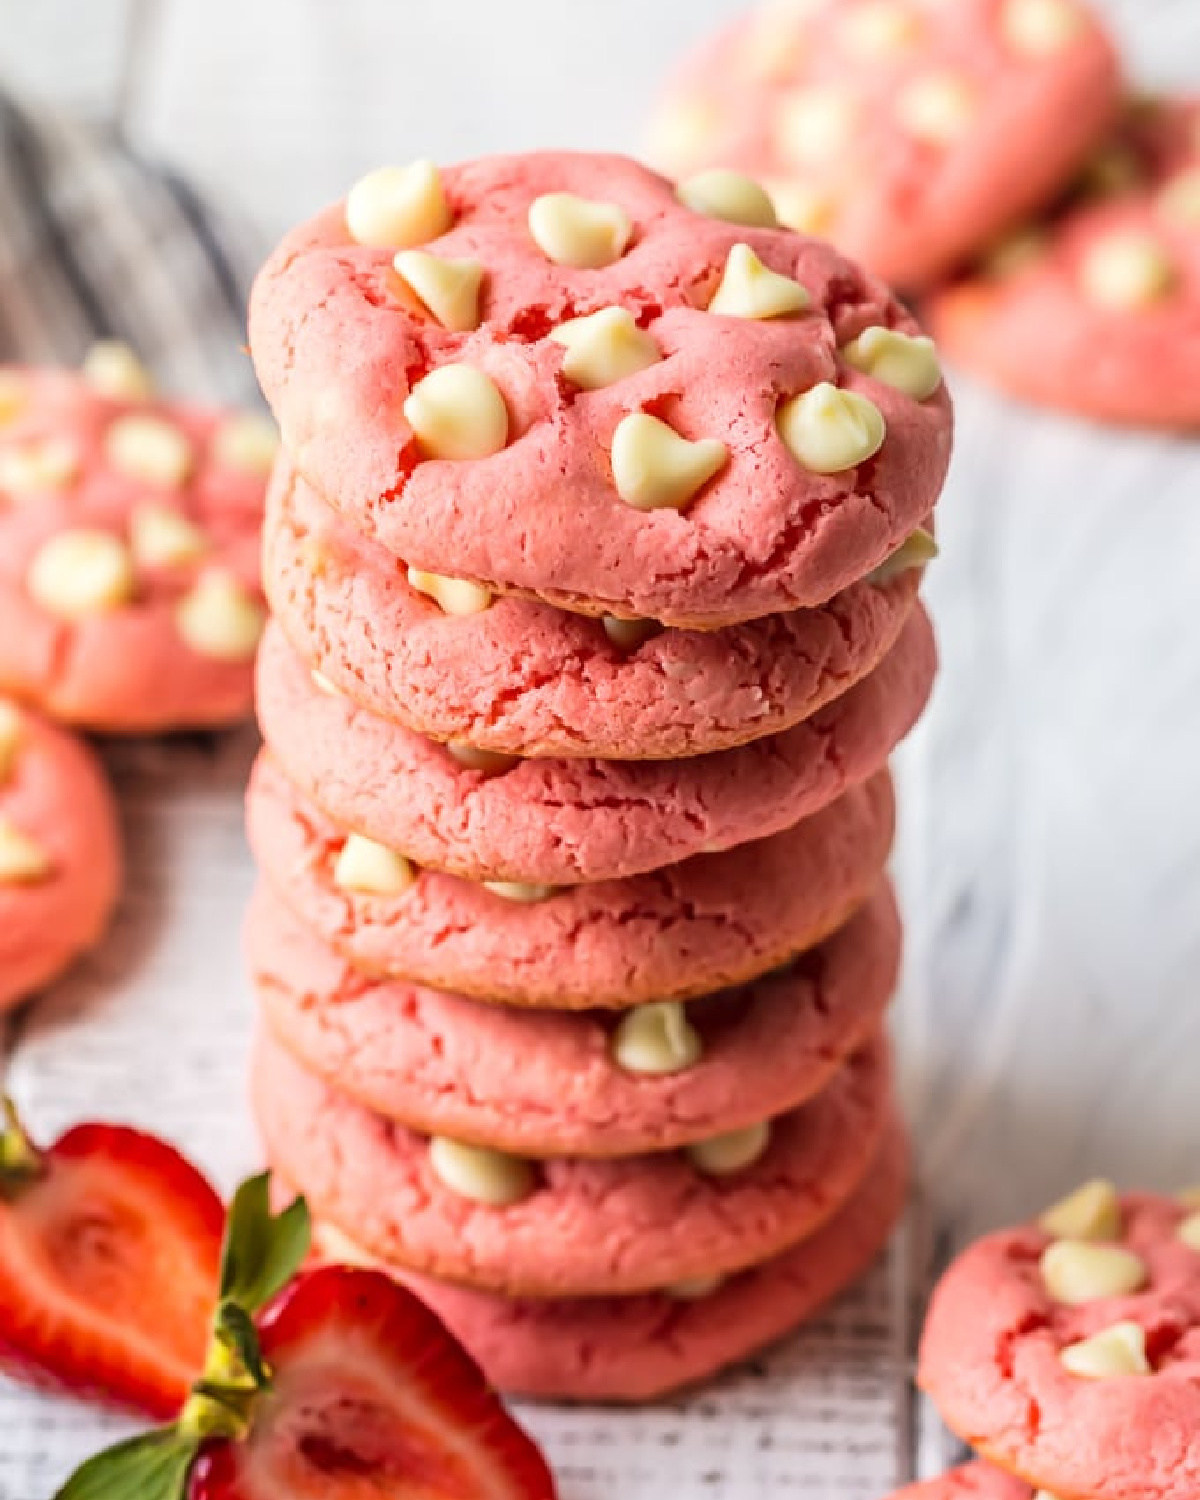 A stack of strawberry cake mix cookies with white chocolate chips.